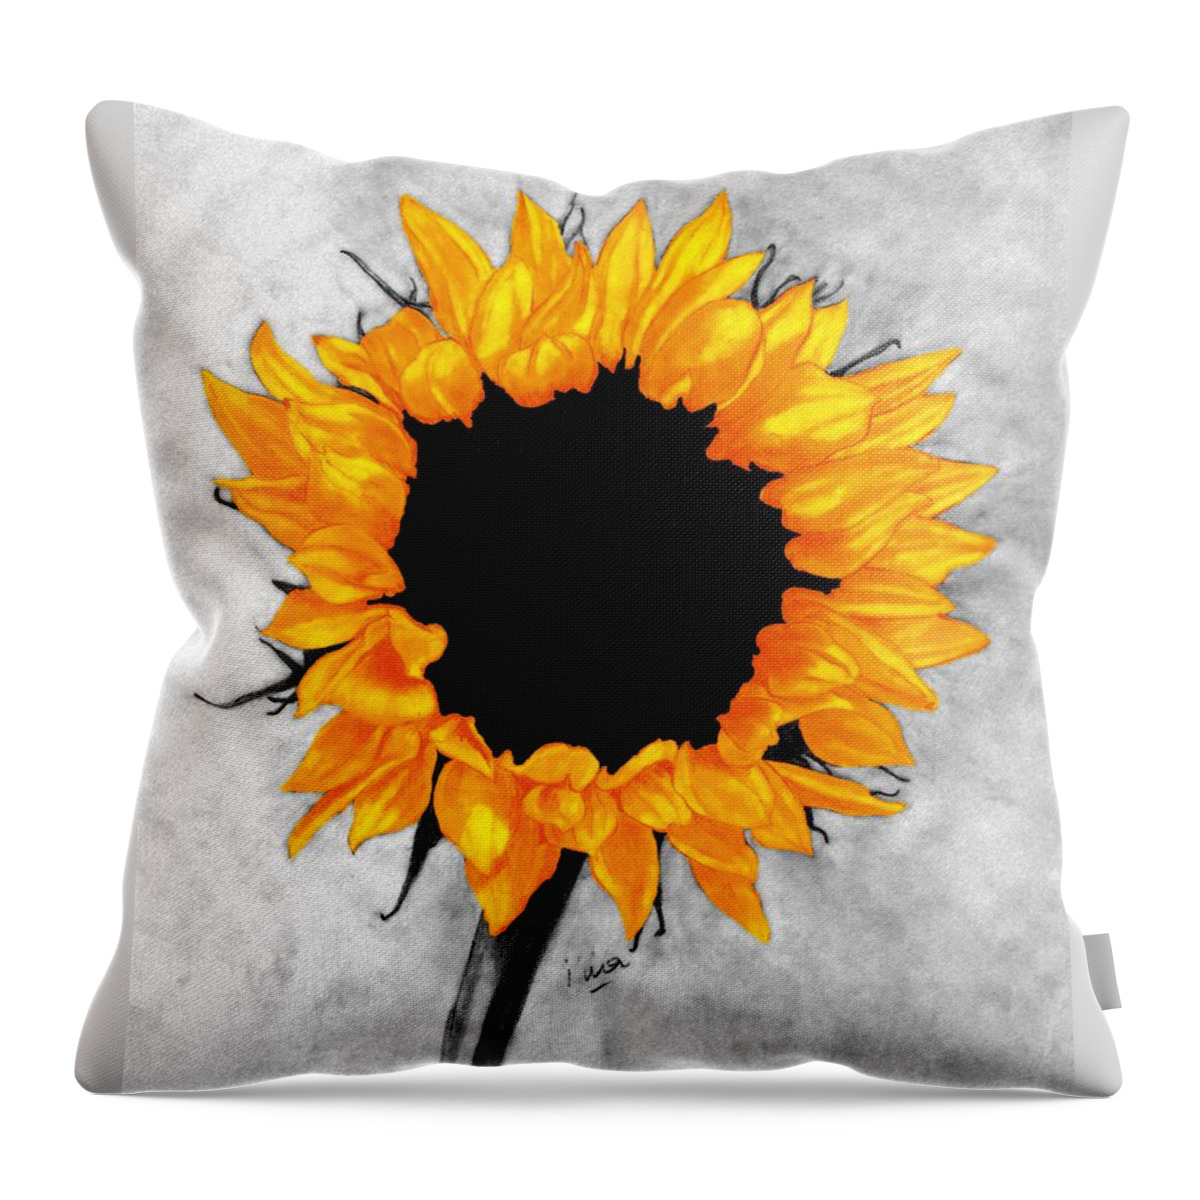 Sunflower Throw Pillow featuring the photograph Sun Fire 2 by I'ina Van Lawick